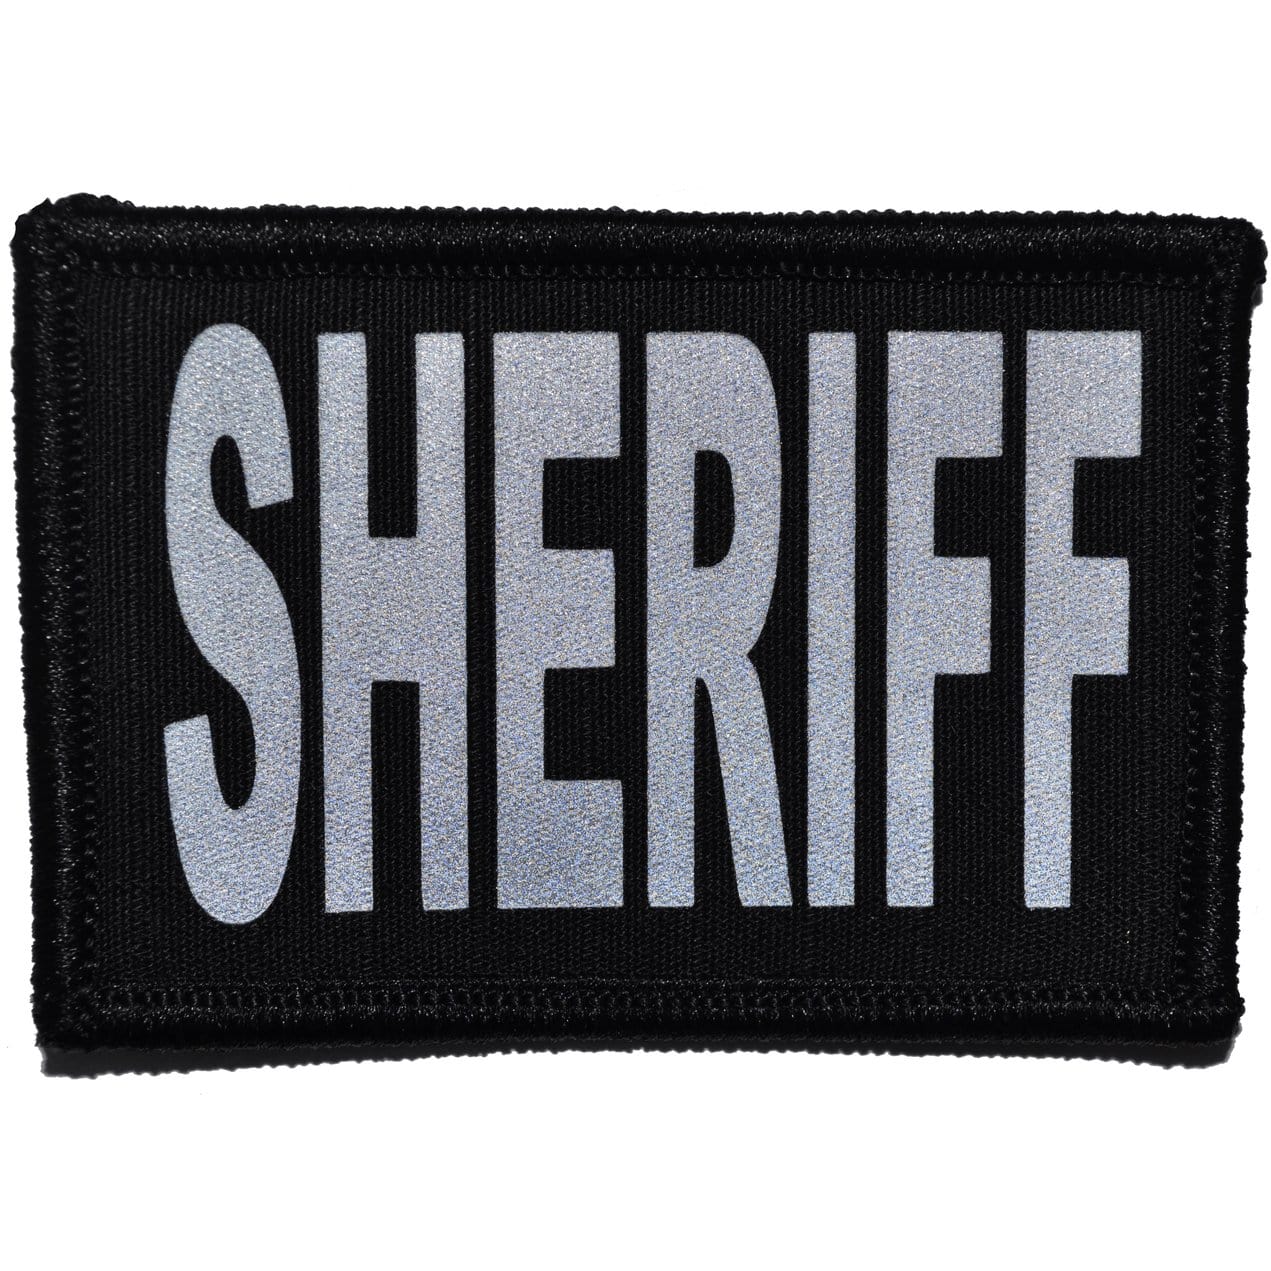 Tactical Gear Junkie Patches Black Sheriff Reflective - 2x3 Patch